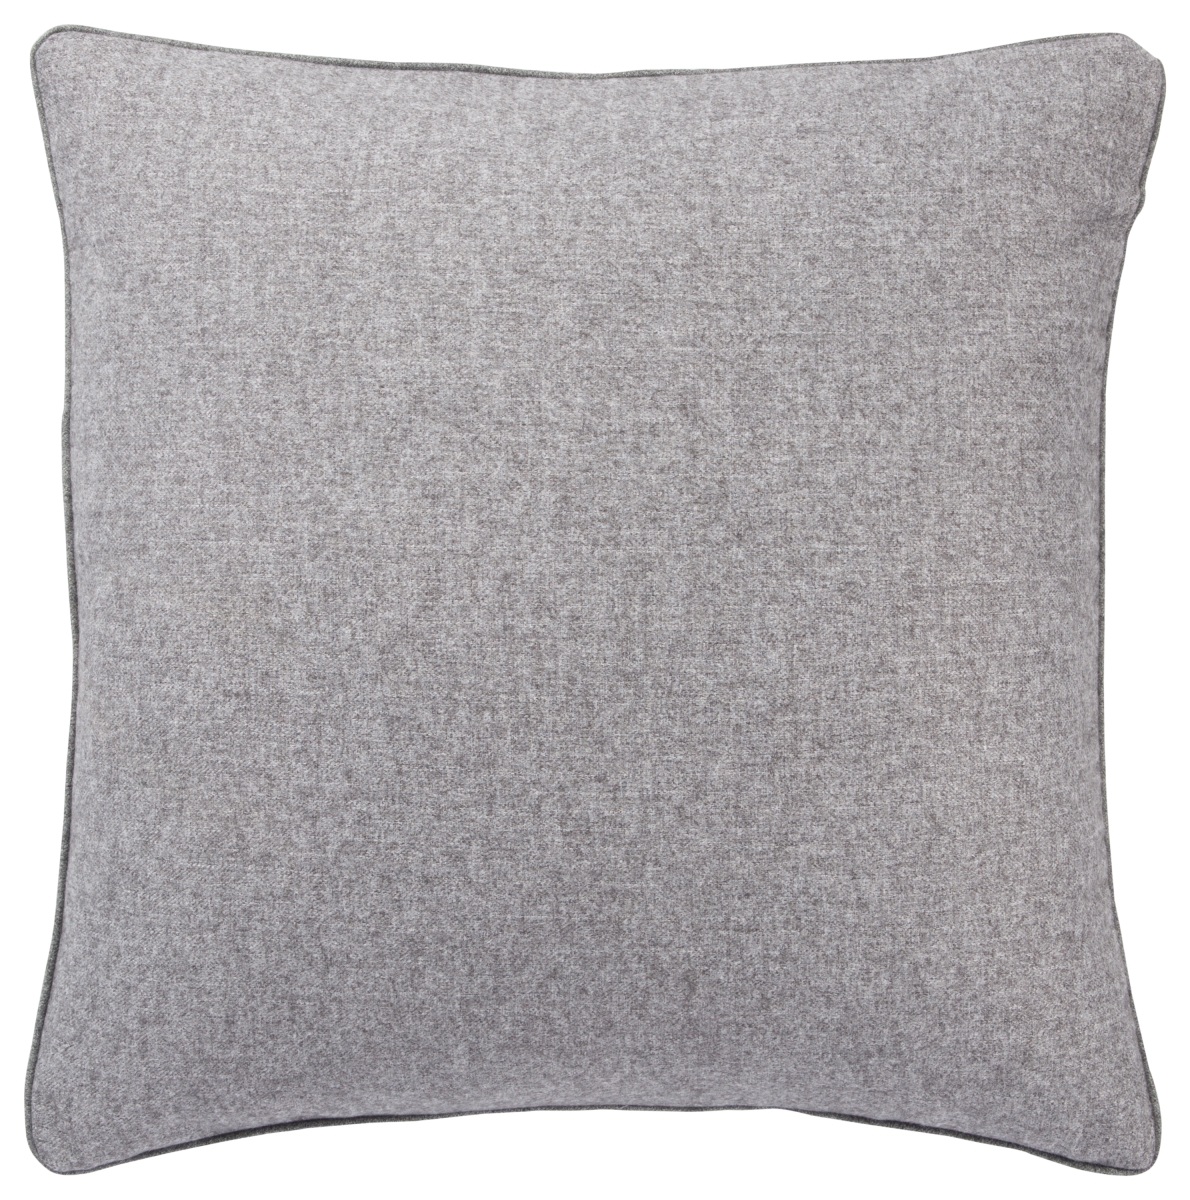 Plw103275 22 X 22 In. Pilcro Rollins Solid Light Gray Down Throw Pillow